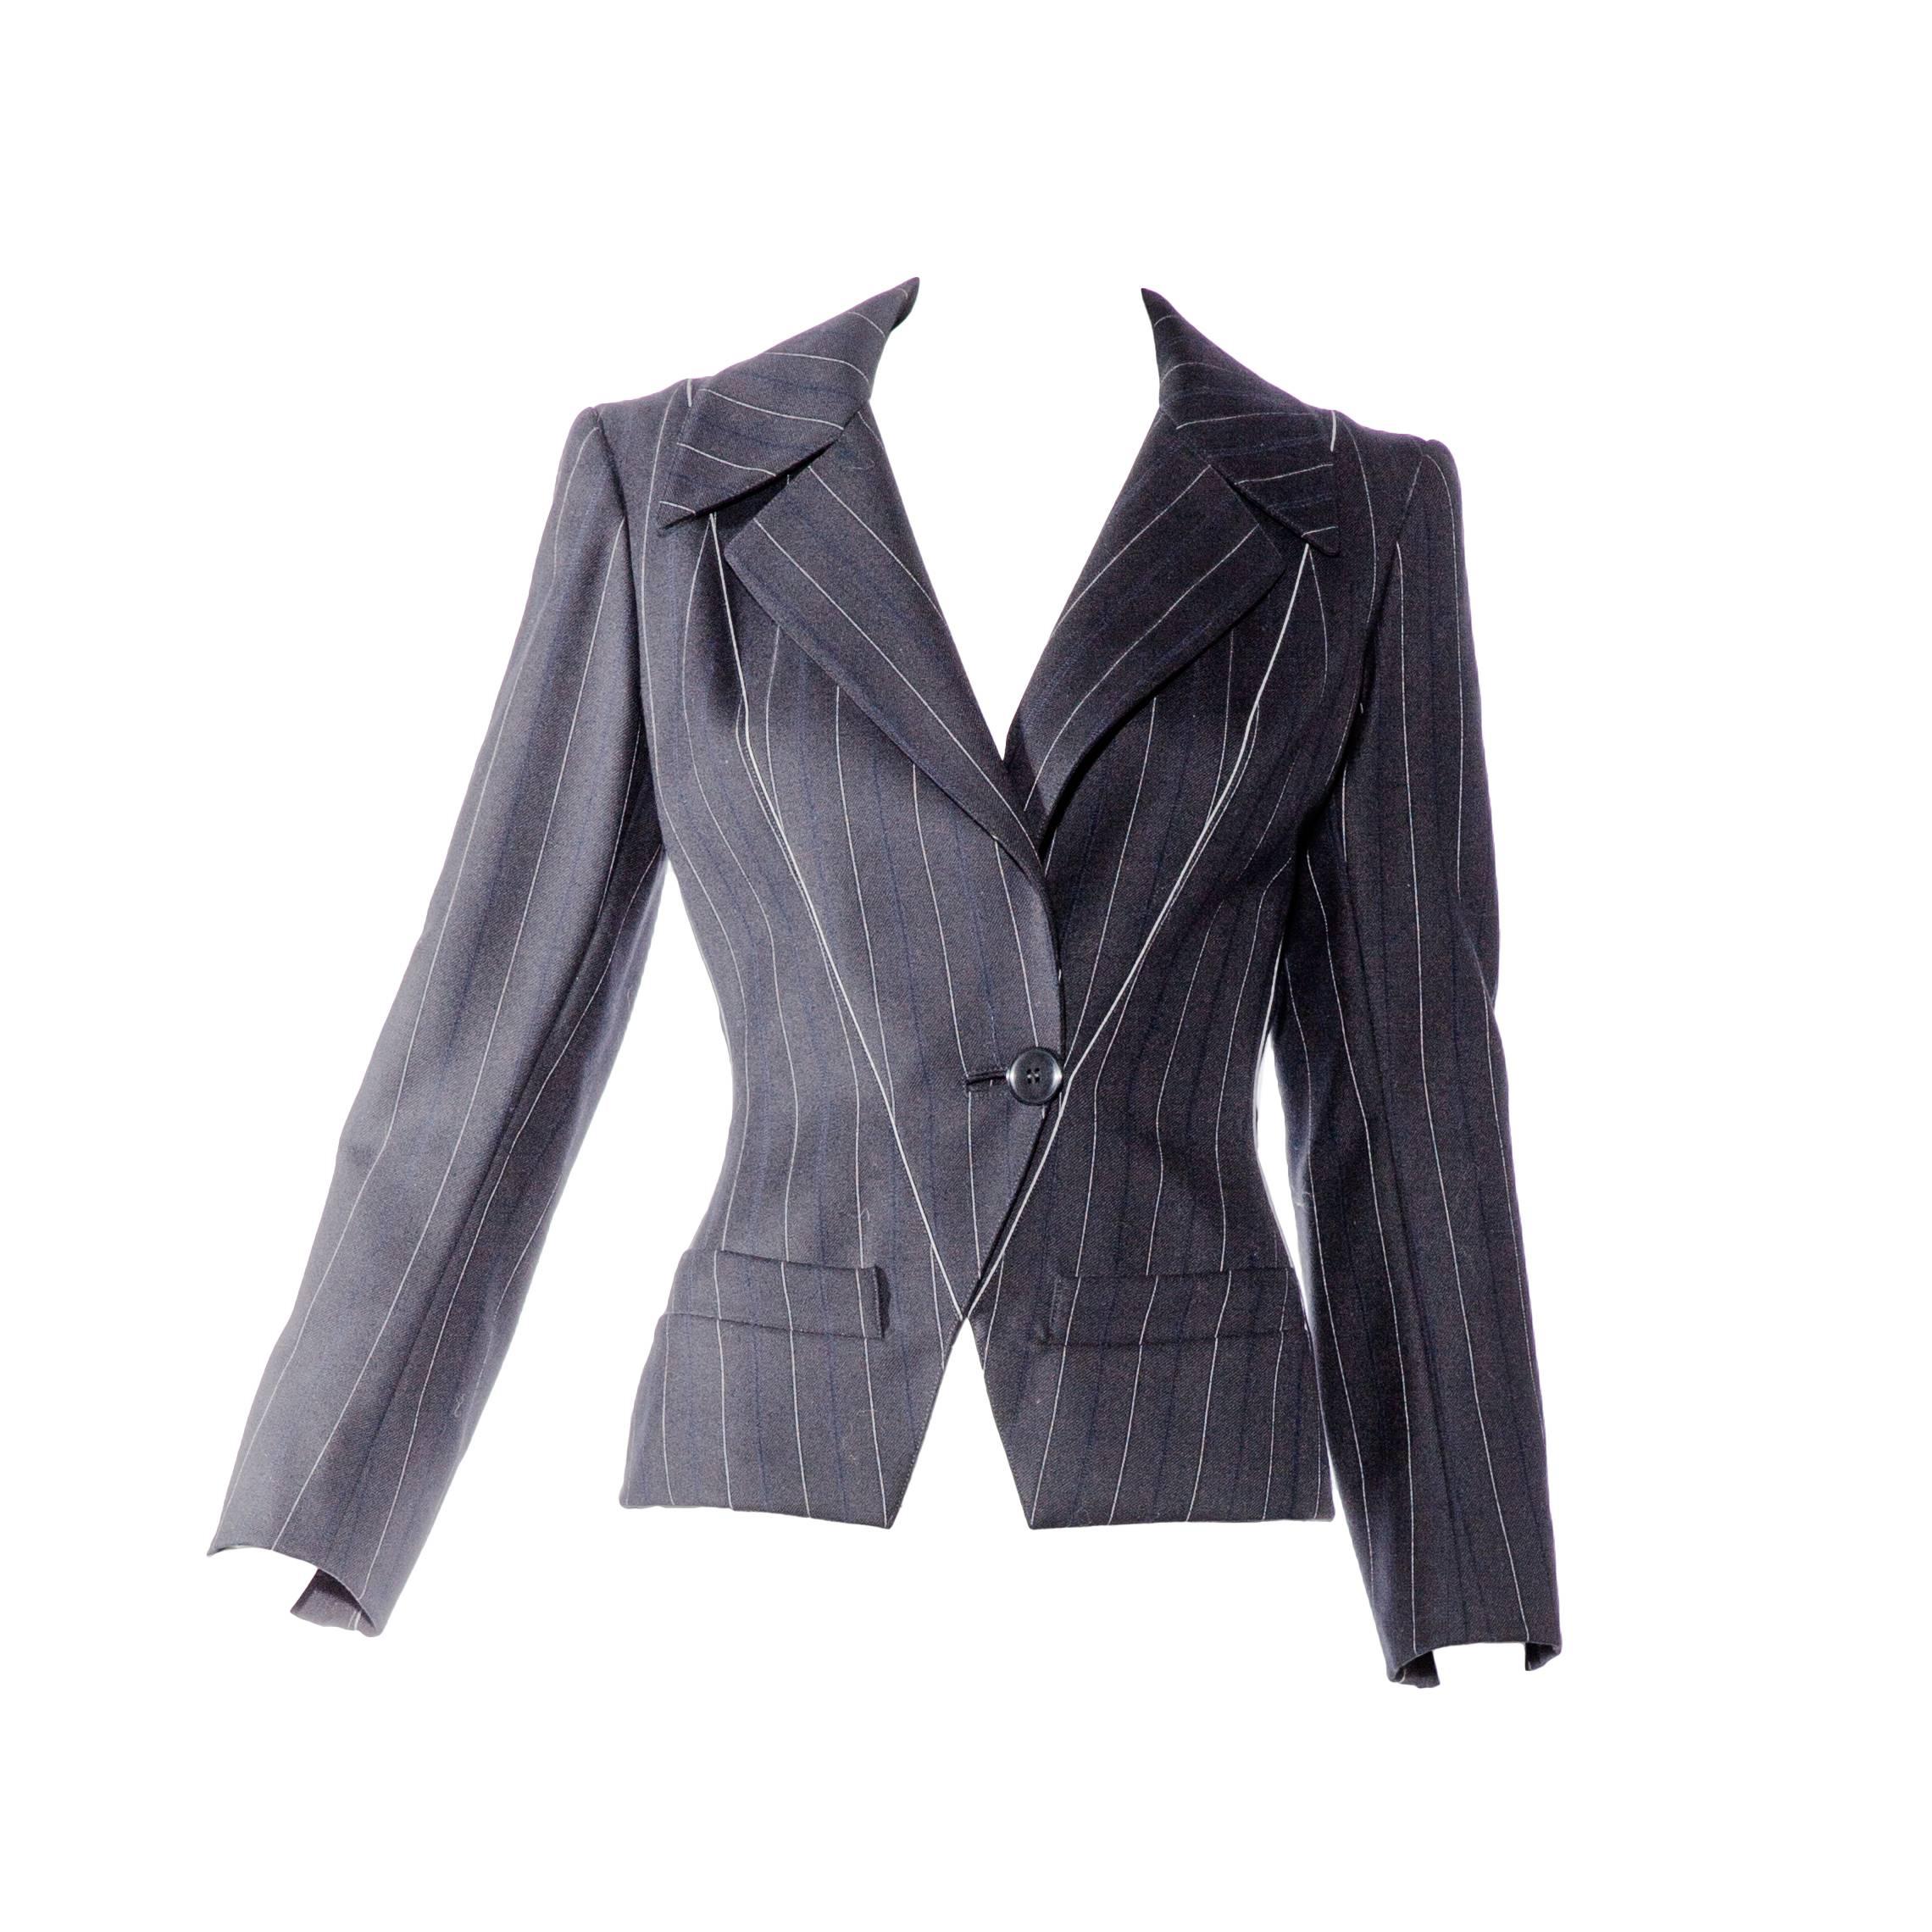 1990s ALAIA Black and Grey Pin striped Fitted Jacket Blazer